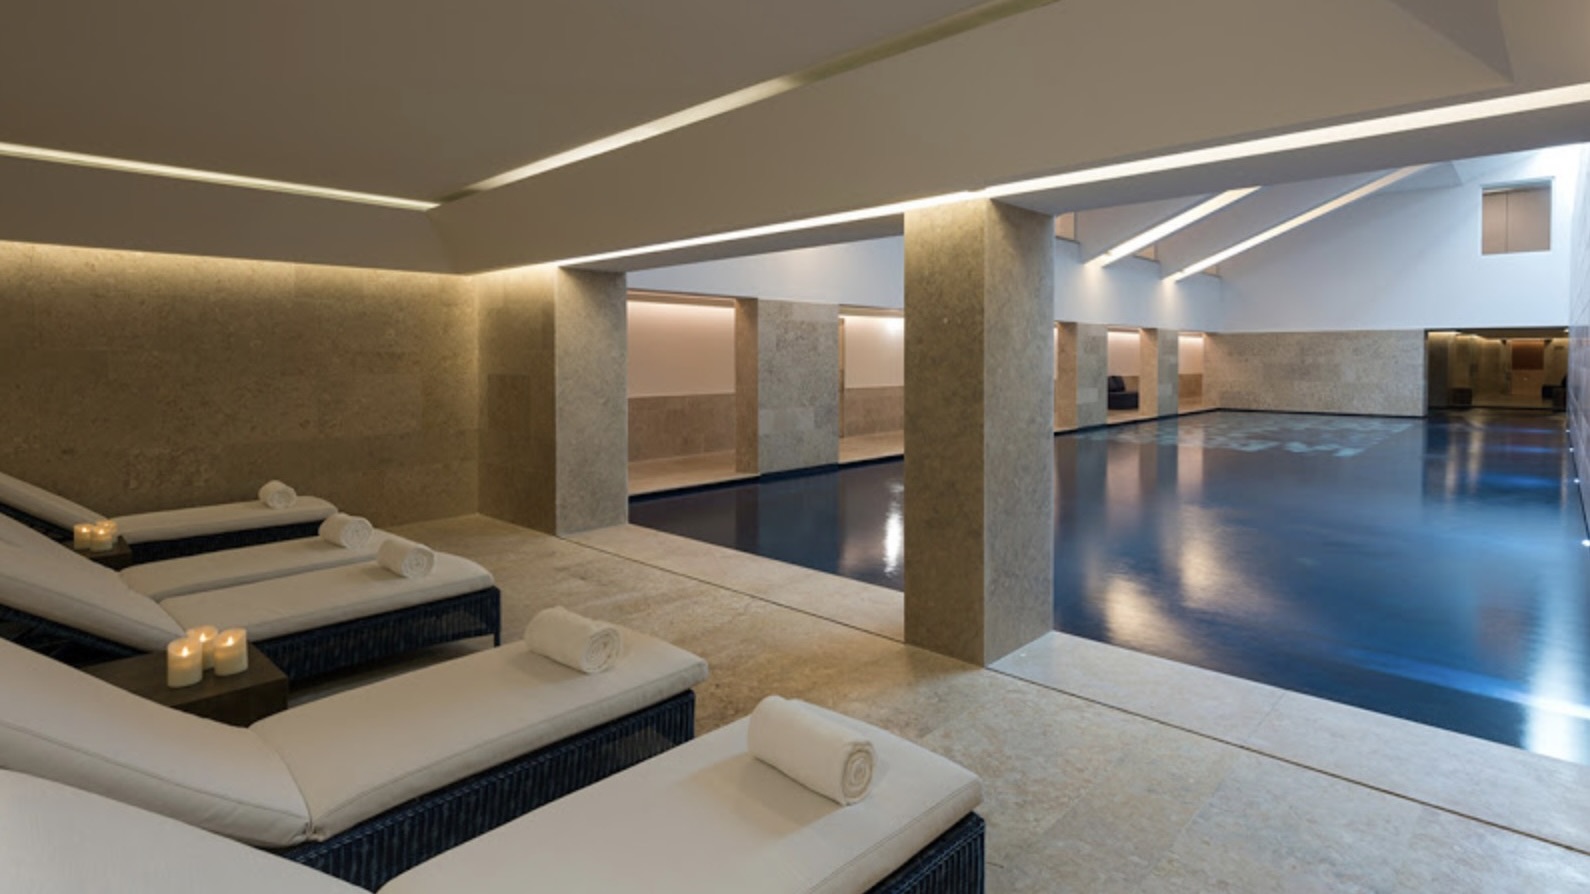 Palácio do Governador - Indoor pool and seating luxury spa hotels in Lisbon